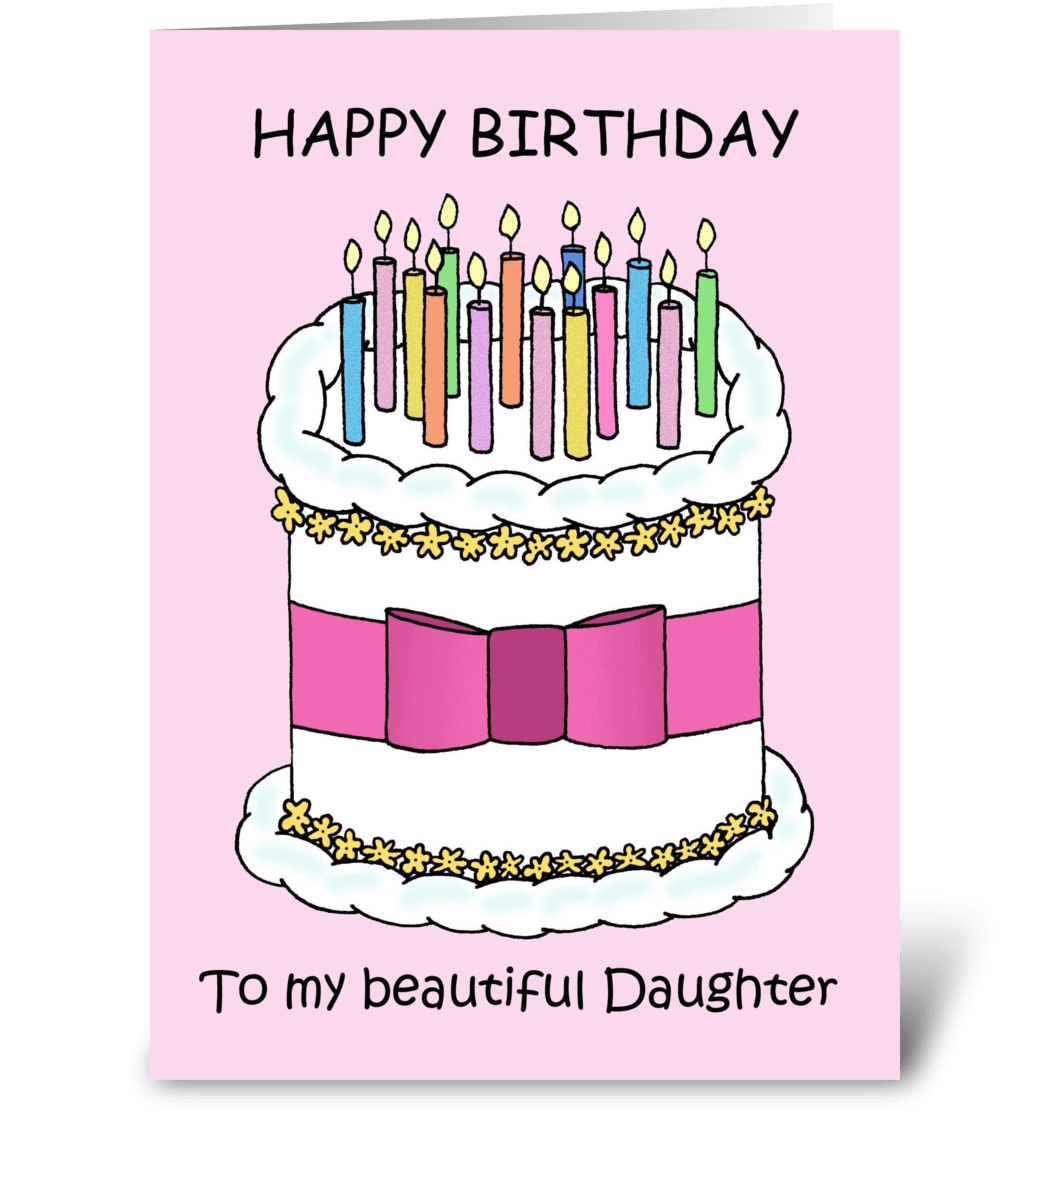 Happy Birthday Daughter Cute Cake Send This Greeting Card